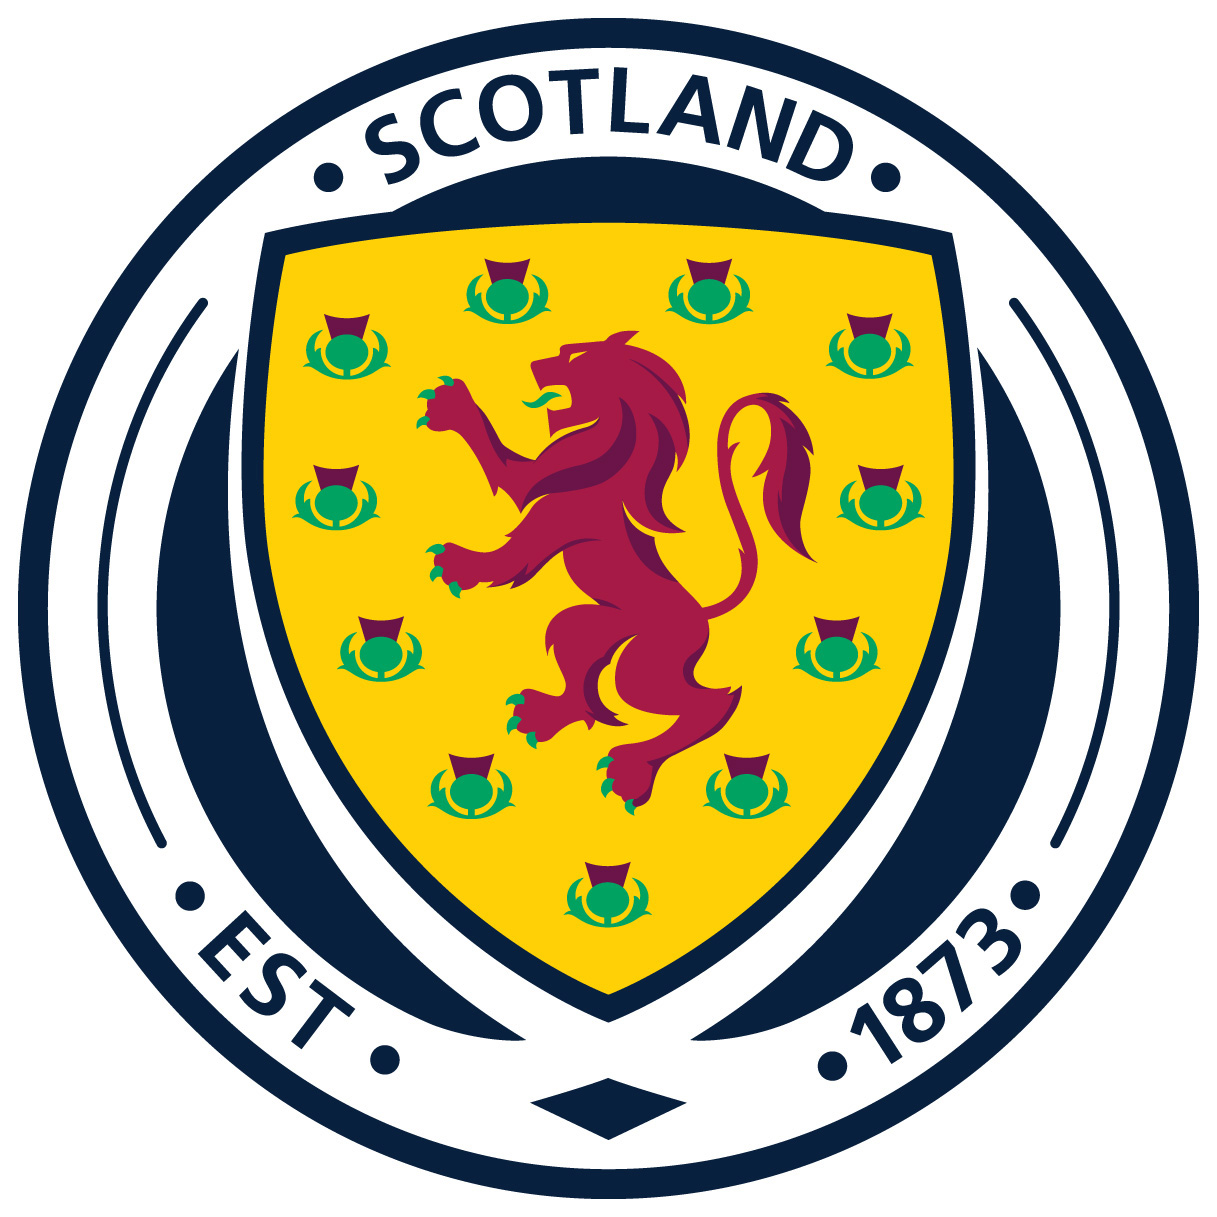 Scotland To Play Poland In Support Of Ukraine Fundraising Appeal